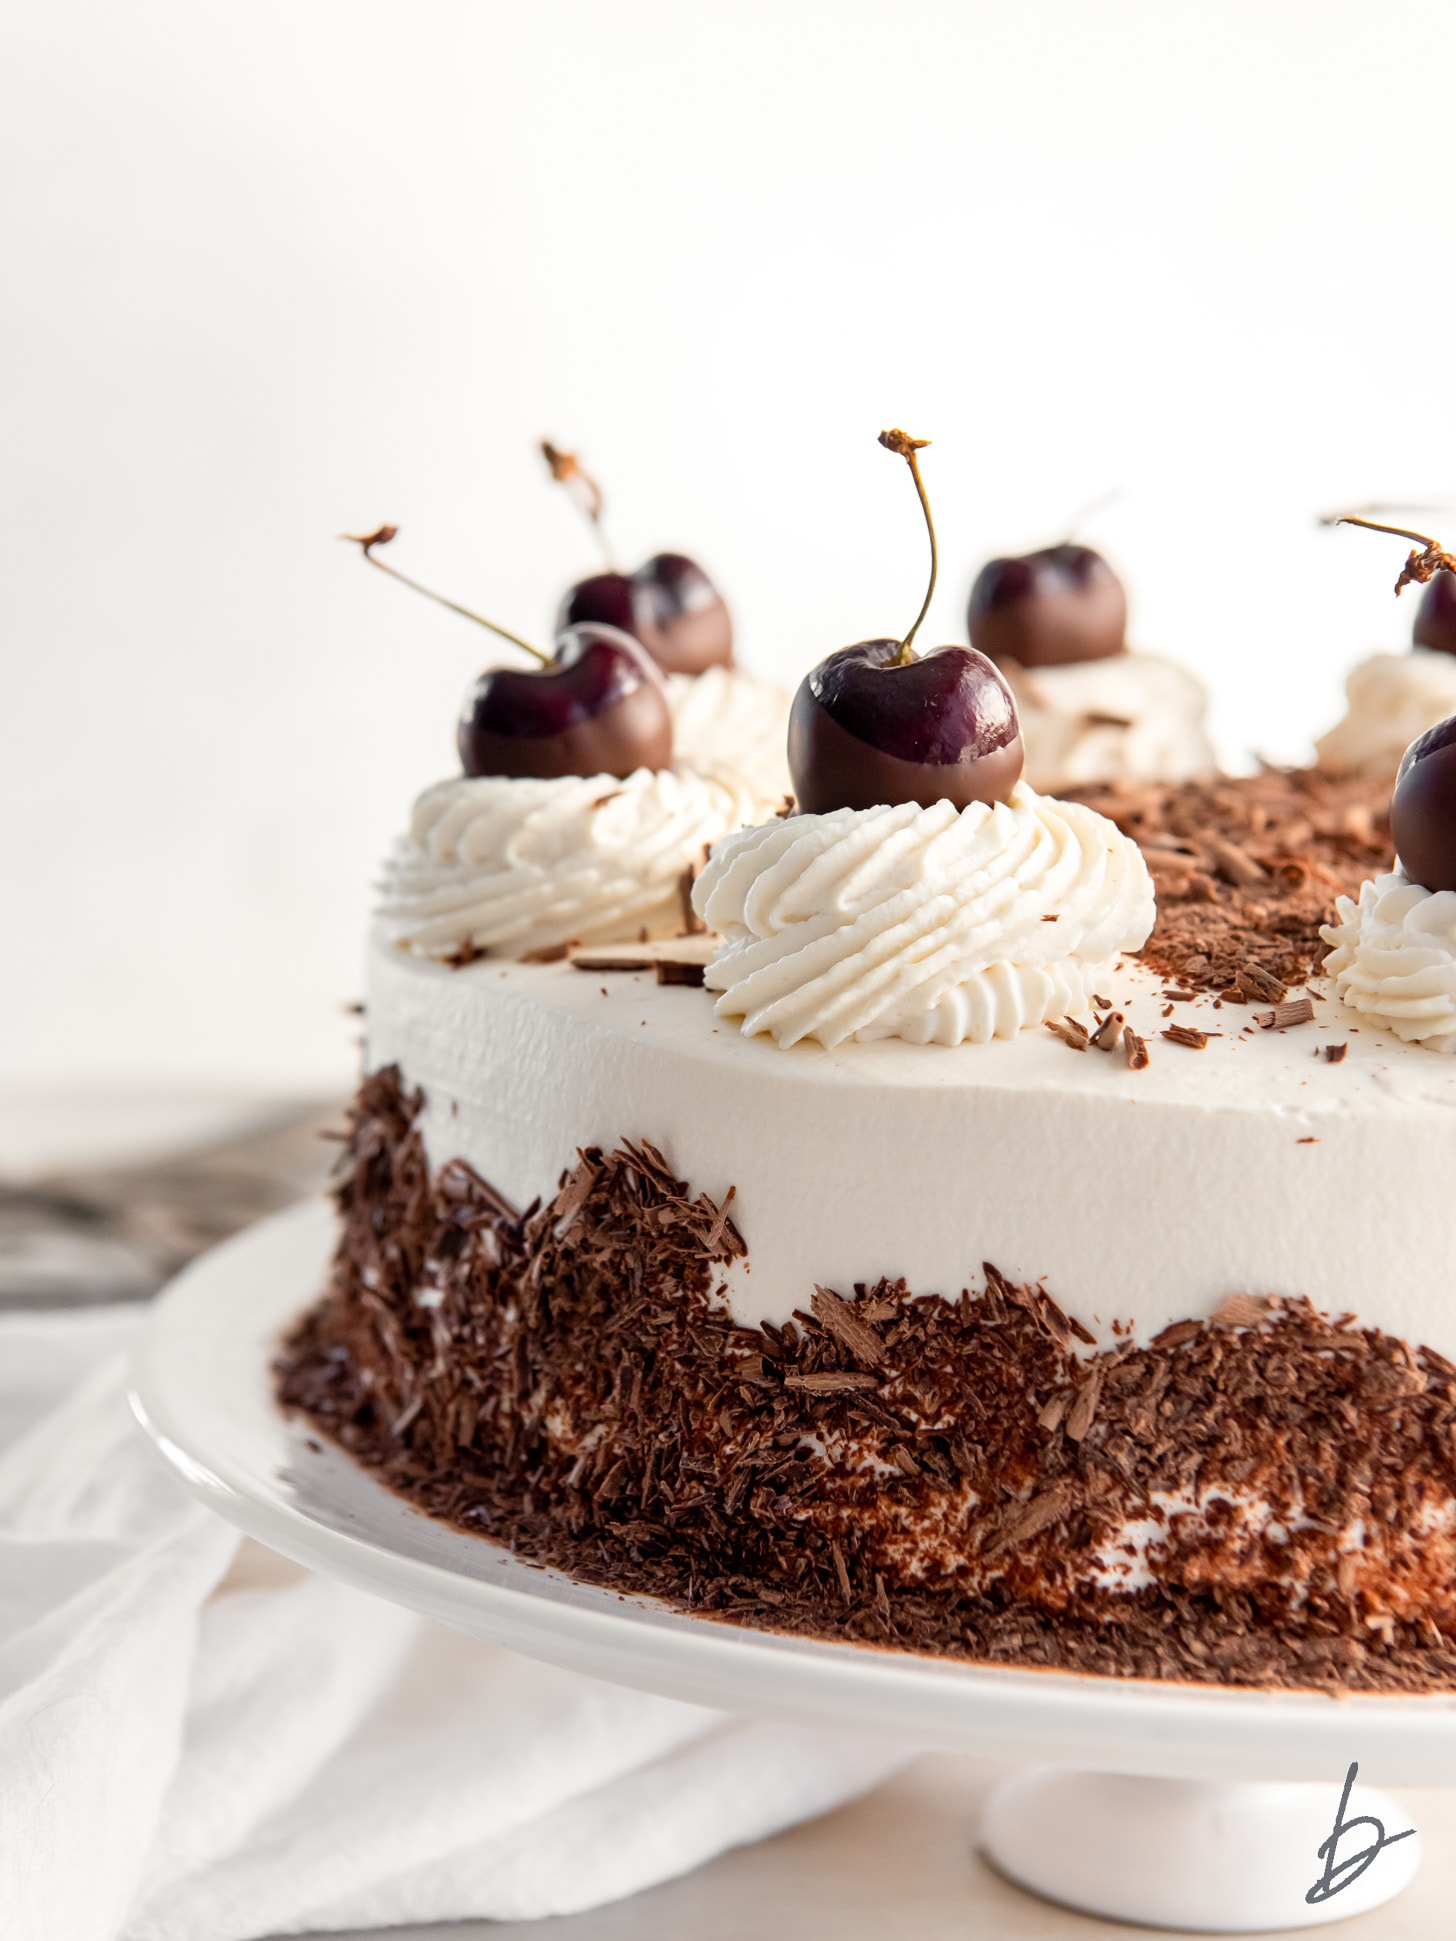 black forest cake garnished with chocolate shavings, whipped cream and cherries.